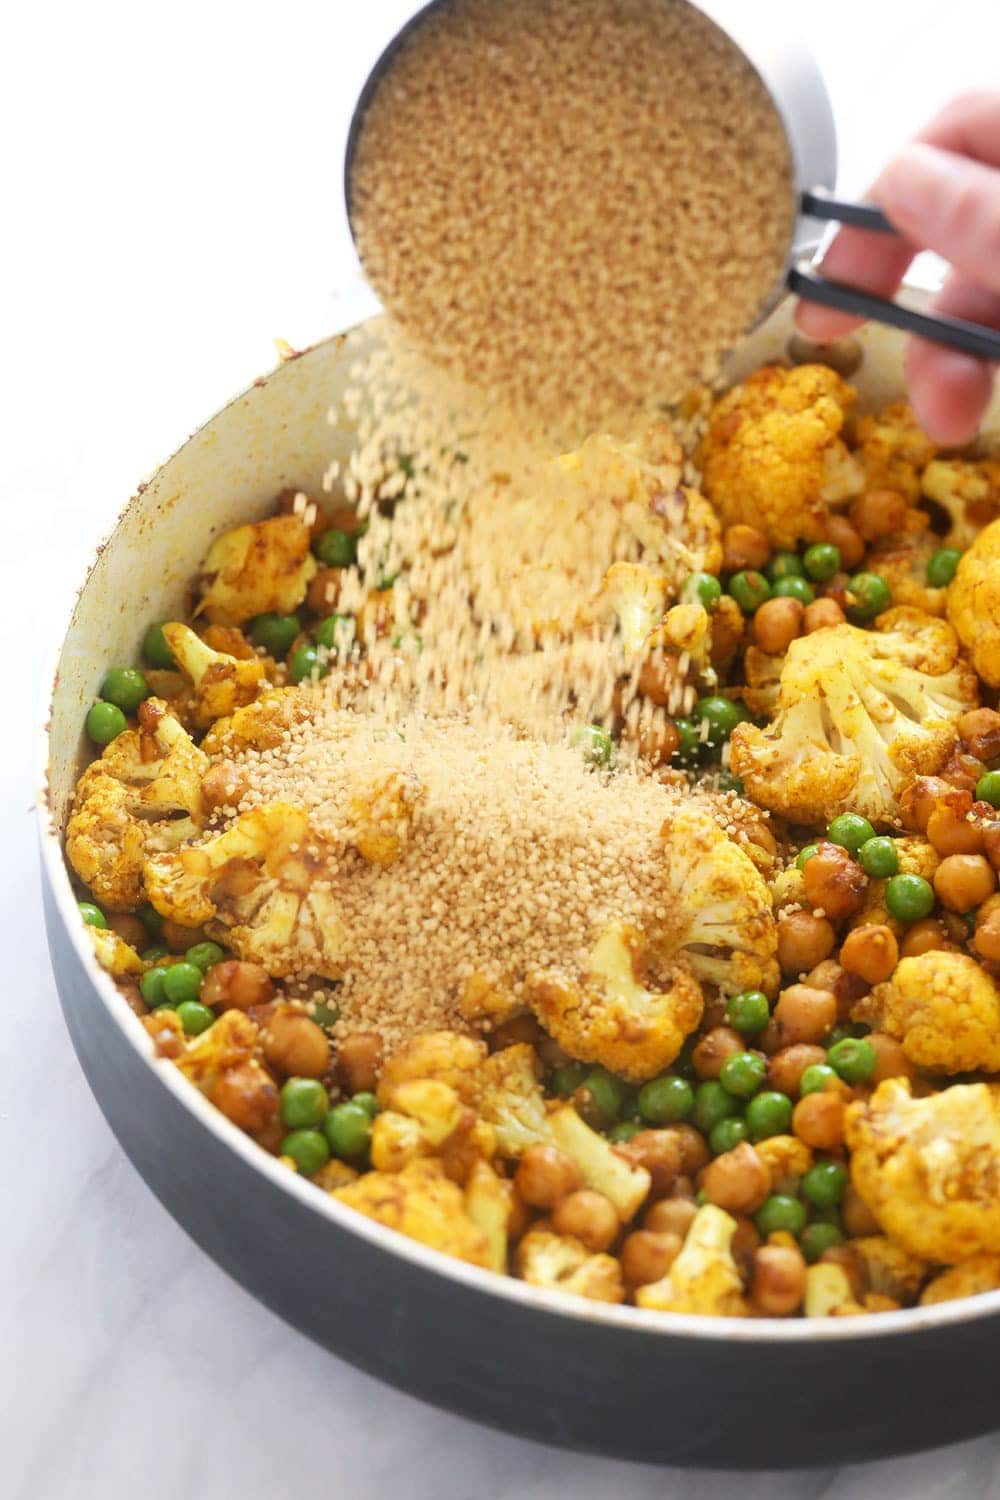 couscous being poured over the rest of the moroccan chickpea ingredients in a skillet